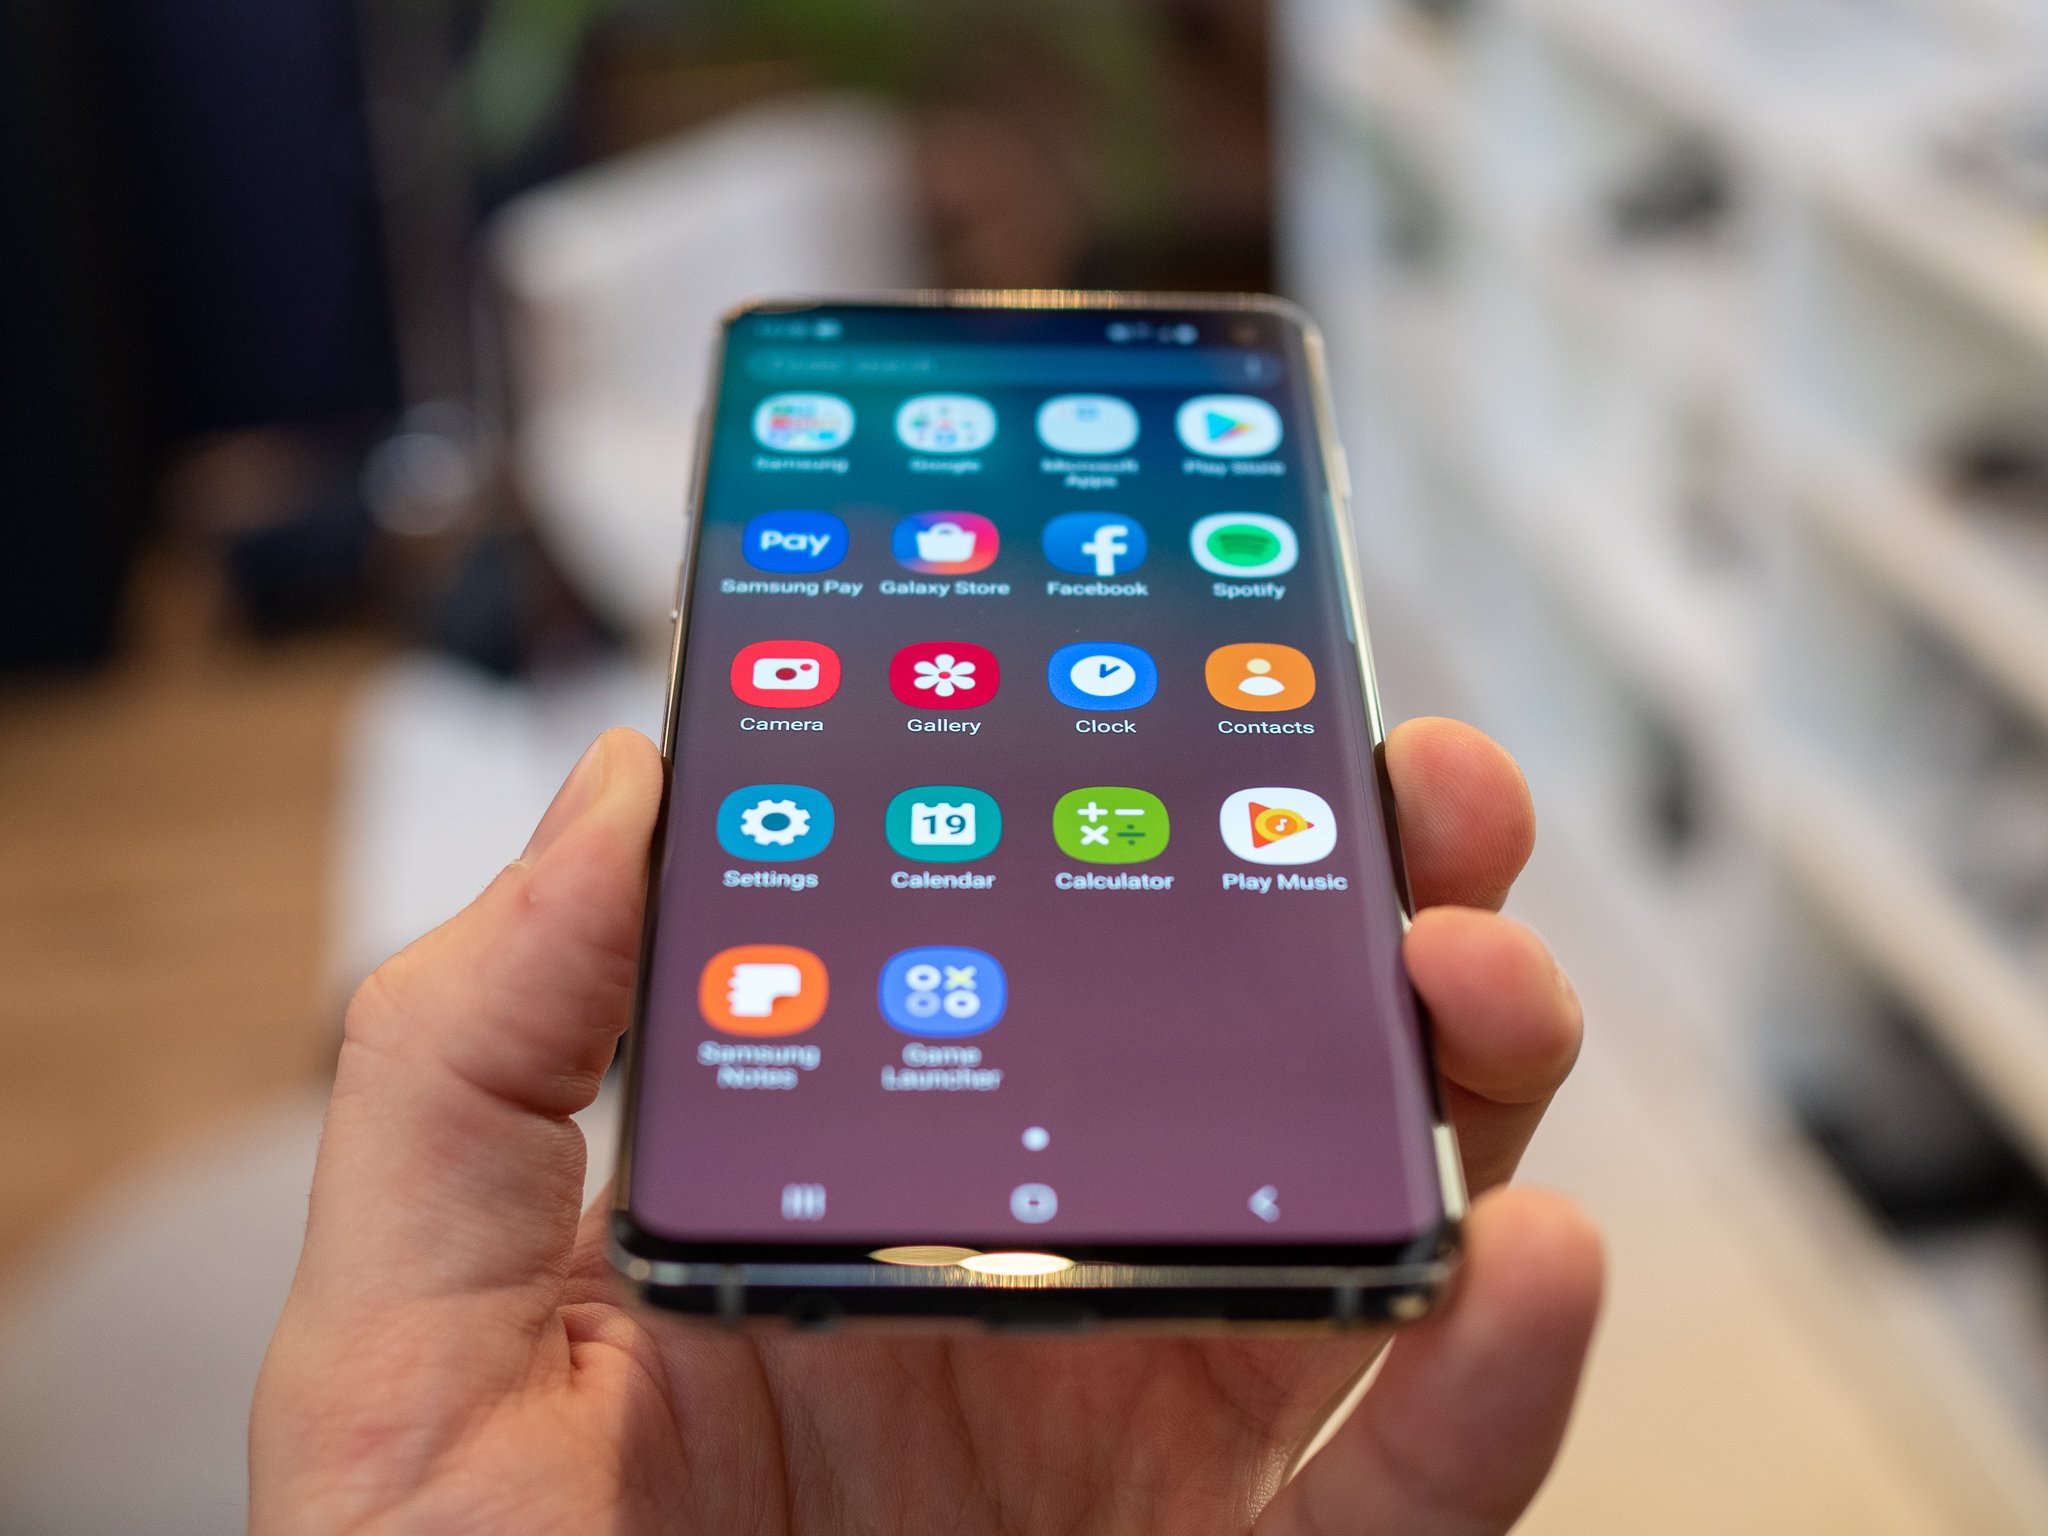 Samsung Galaxy S10: Which storage size should I buy? | Android